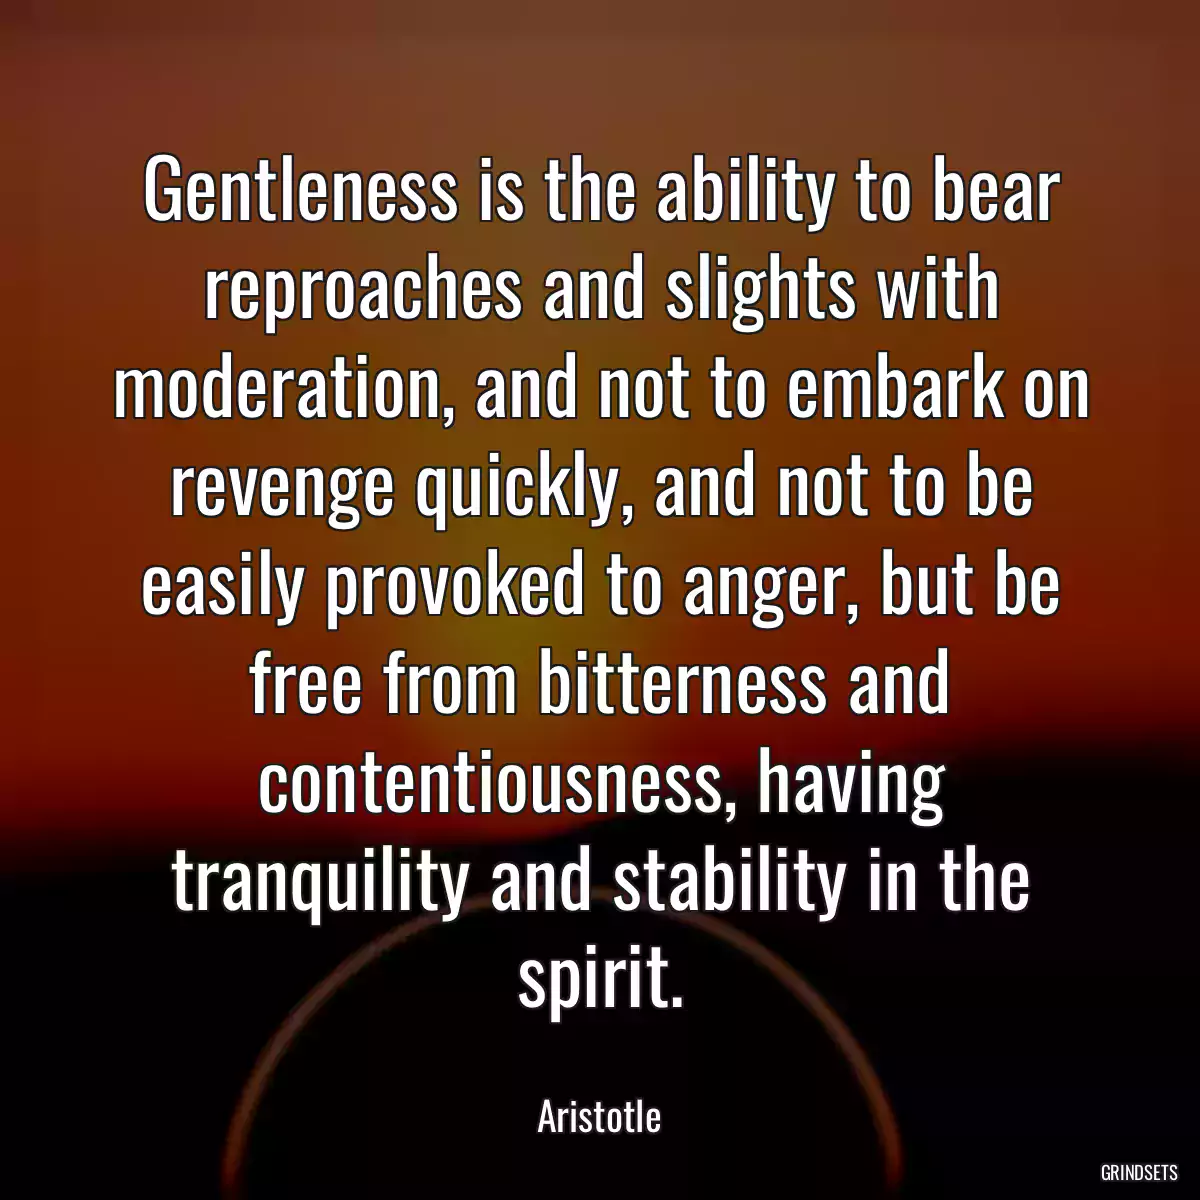 Gentleness is the ability to bear reproaches and slights with moderation, and not to embark on revenge quickly, and not to be easily provoked to anger, but be free from bitterness and contentiousness, having tranquility and stability in the spirit.